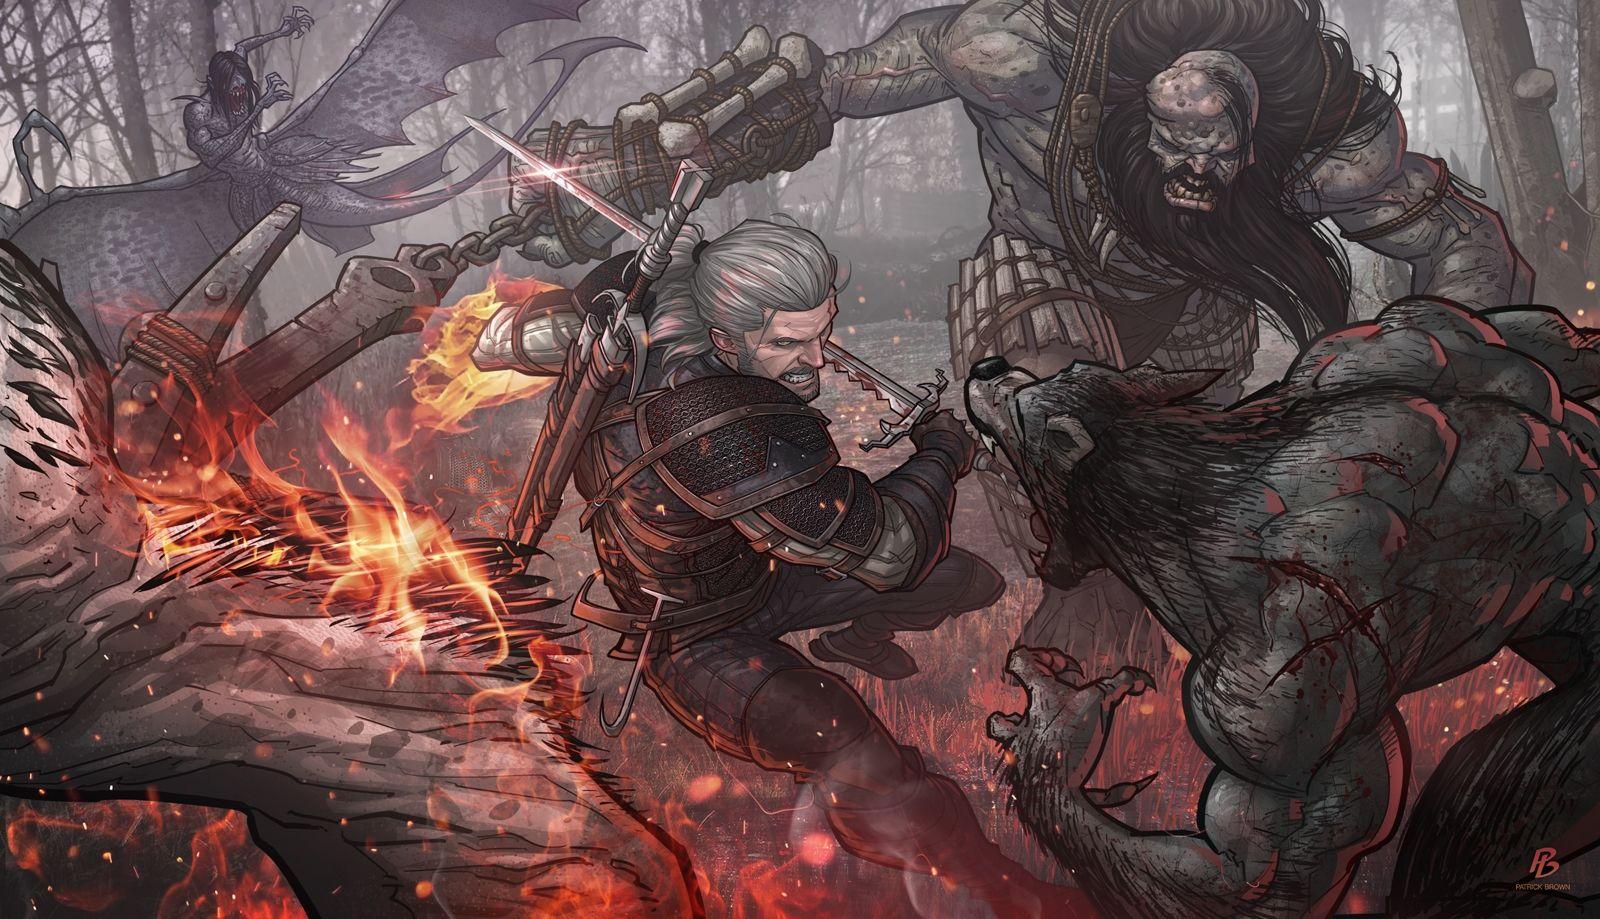 Wallpaper Geralt Of Rivia, The Witcher Fight, Monsters